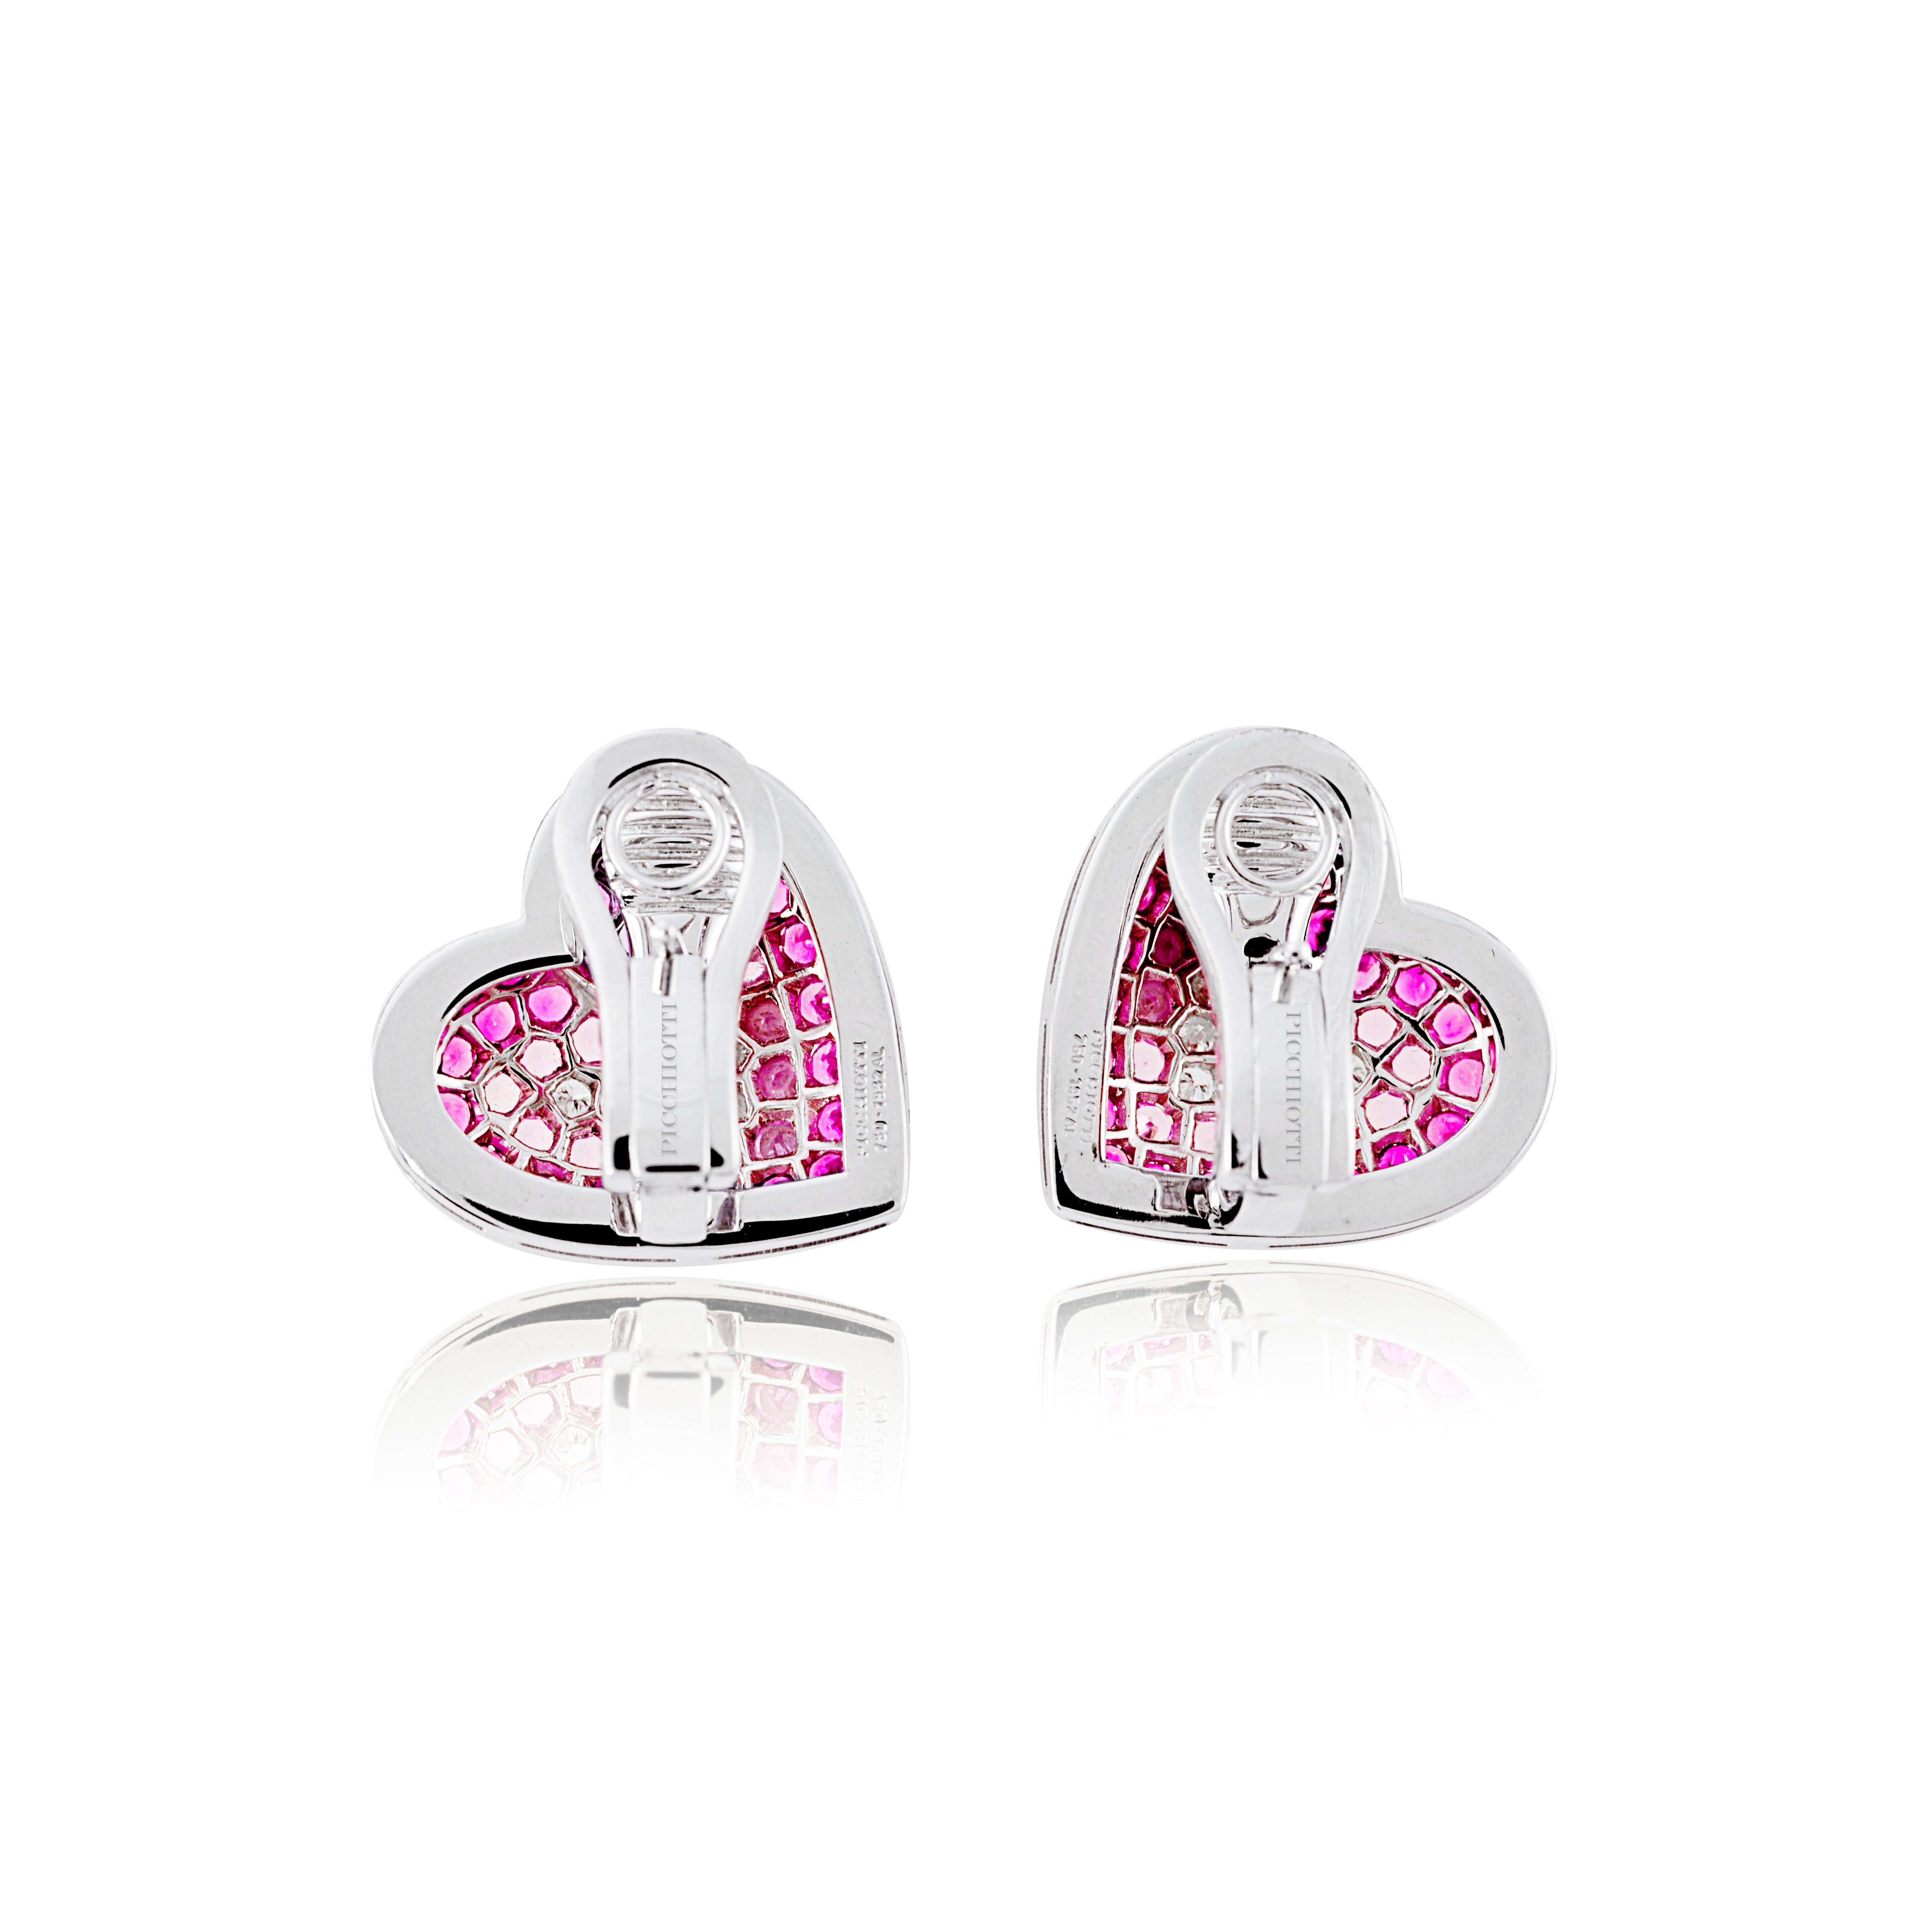 Picchiotti White Gold Diamonds, Rubies and Pink Sapphire Heart-Shaped Earrings (Rundschliff) im Angebot